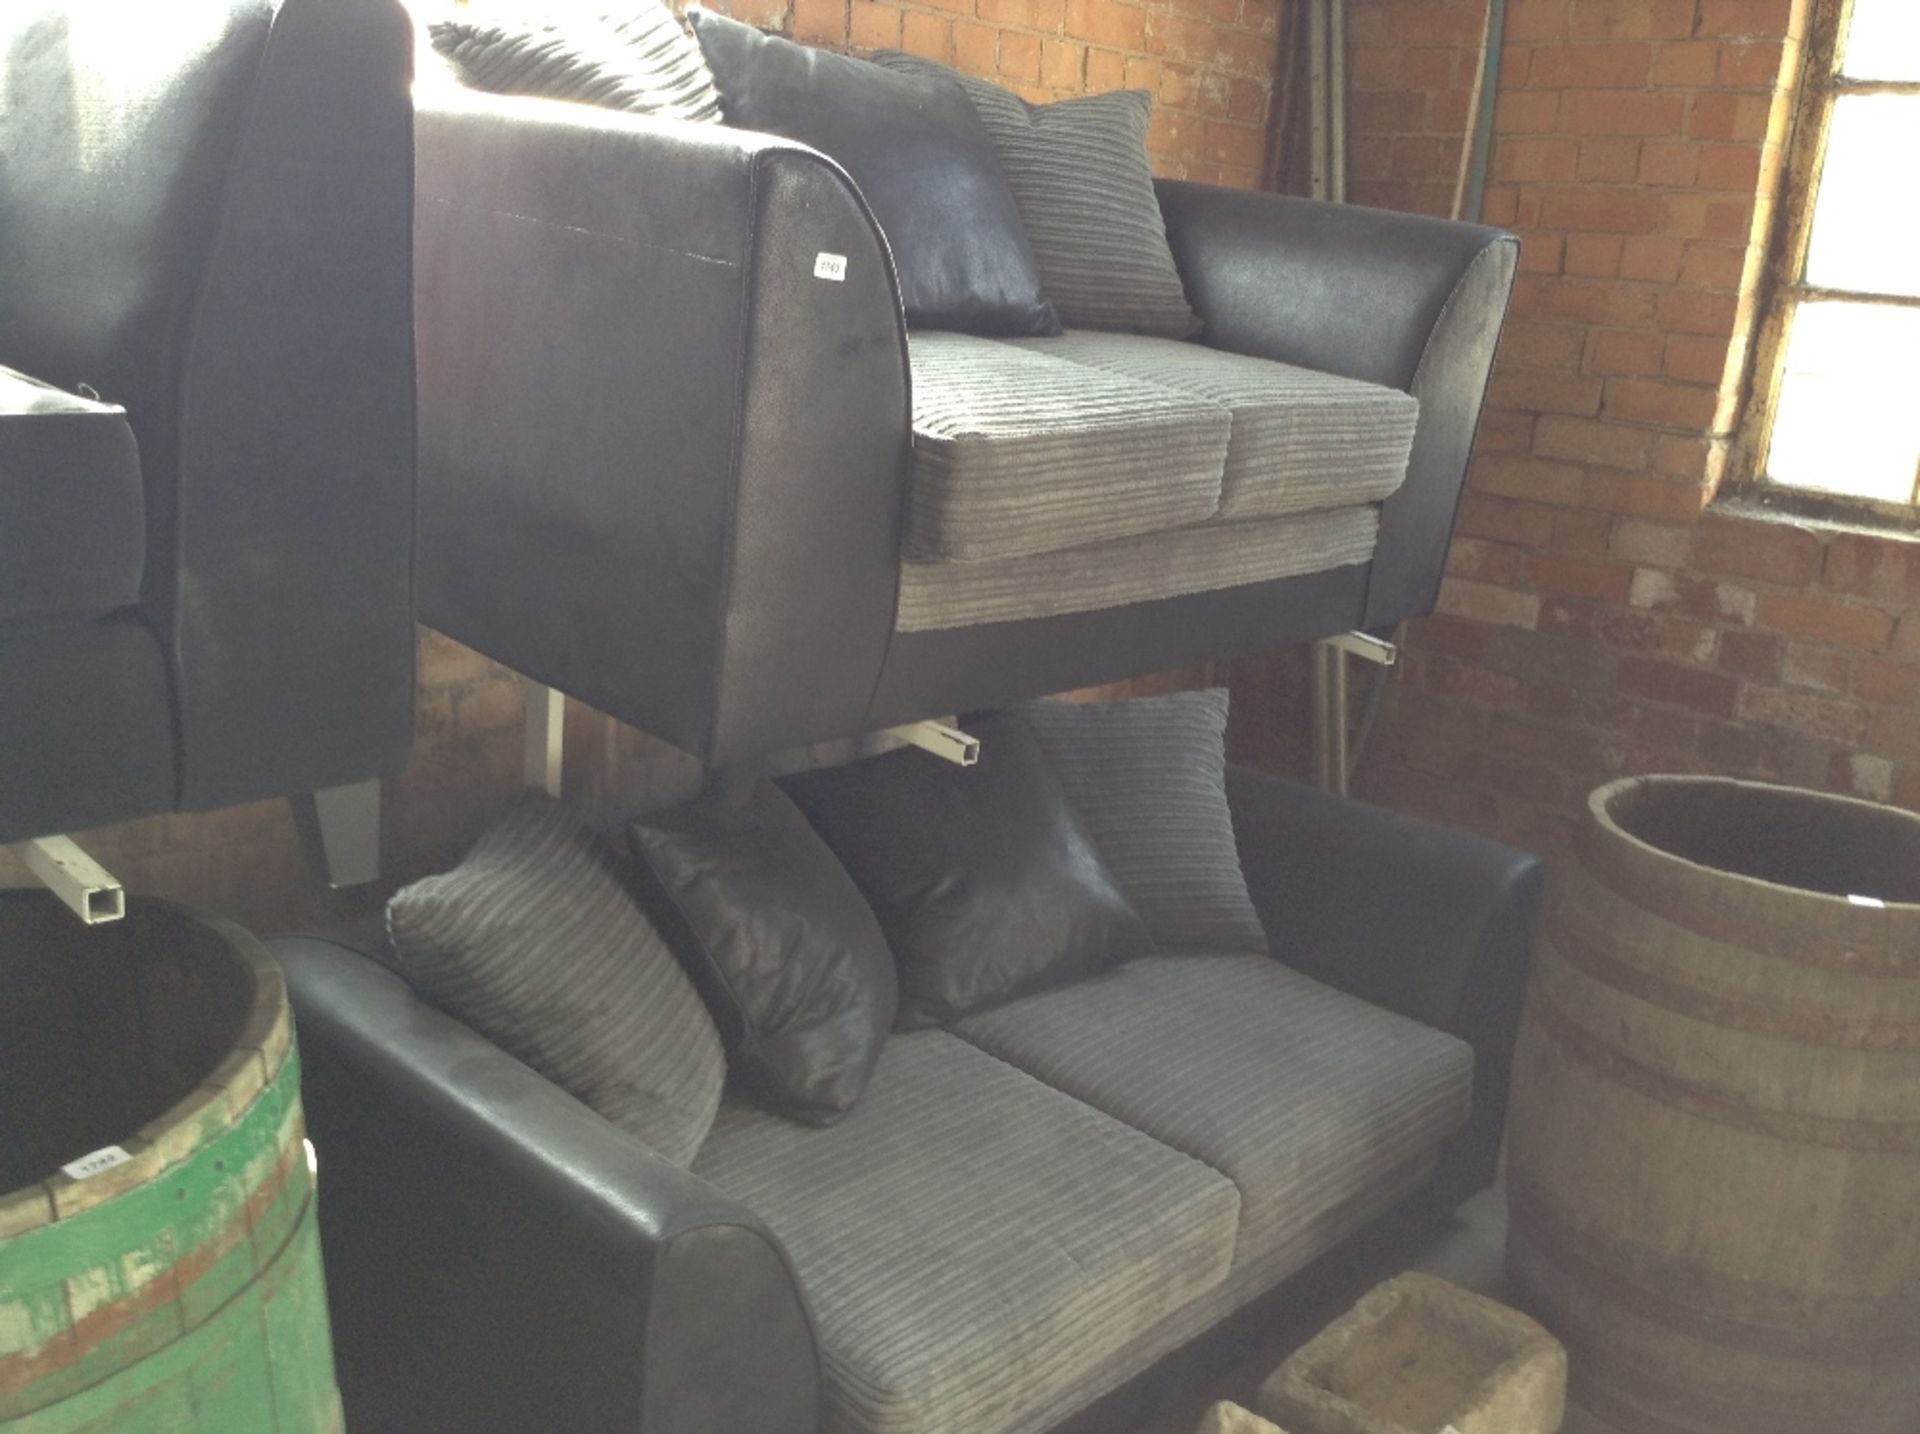 CHARCOAL AND BLACK 3 SEATER SOFA AND 2 SEATER SOFA